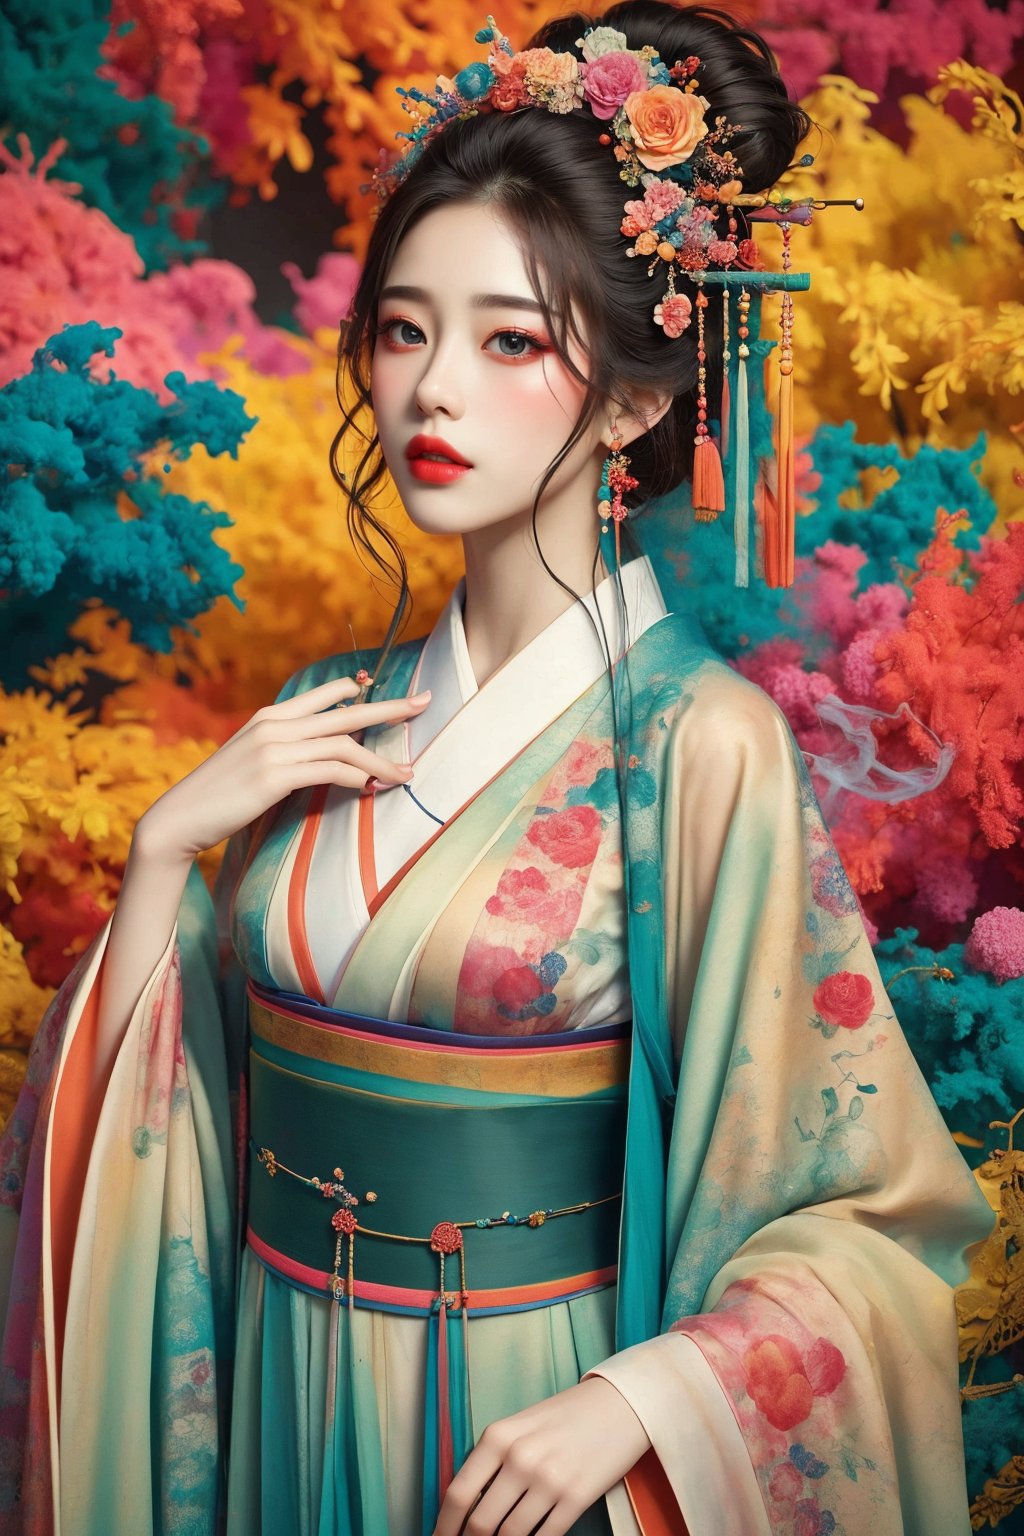 busty and sexy girl, 8k, masterpiece, ultra-realistic, best quality, high resolution, high definition, HANFU, SPLASH COLORFUL INK, COLORFUL SMOKE, FLOWER HEADPIECES,SIH